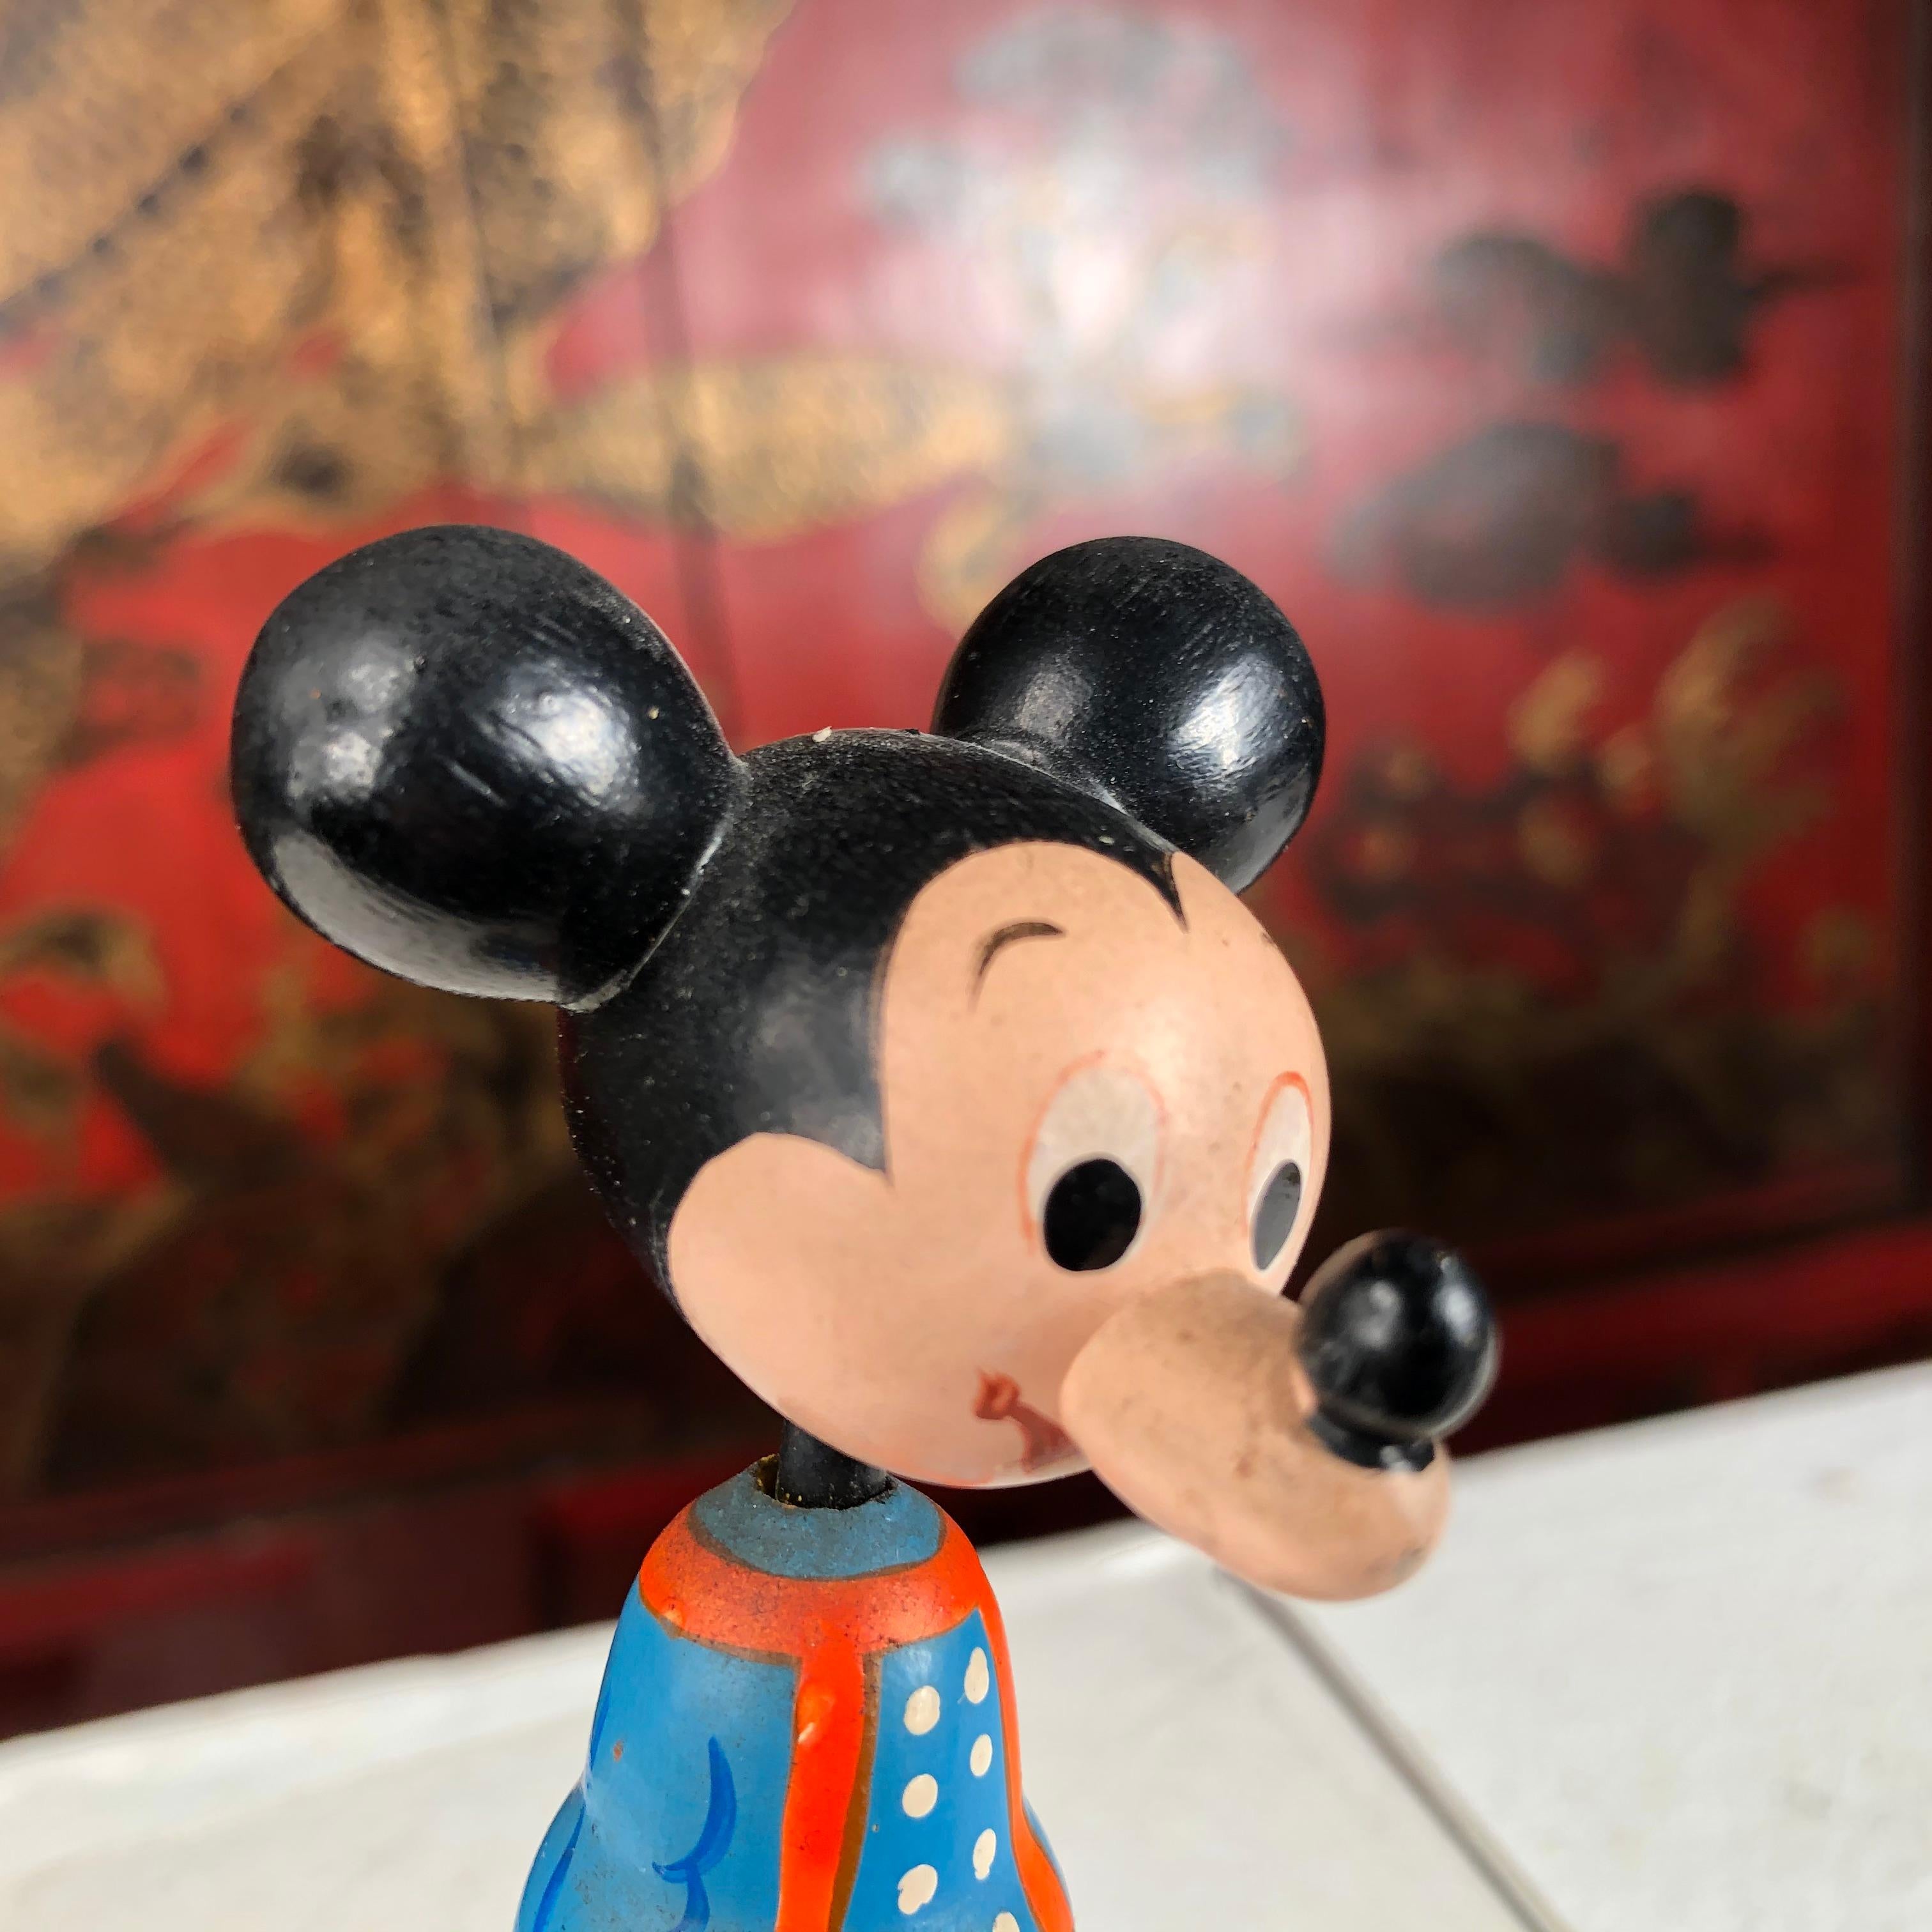 ancient mickey mouse